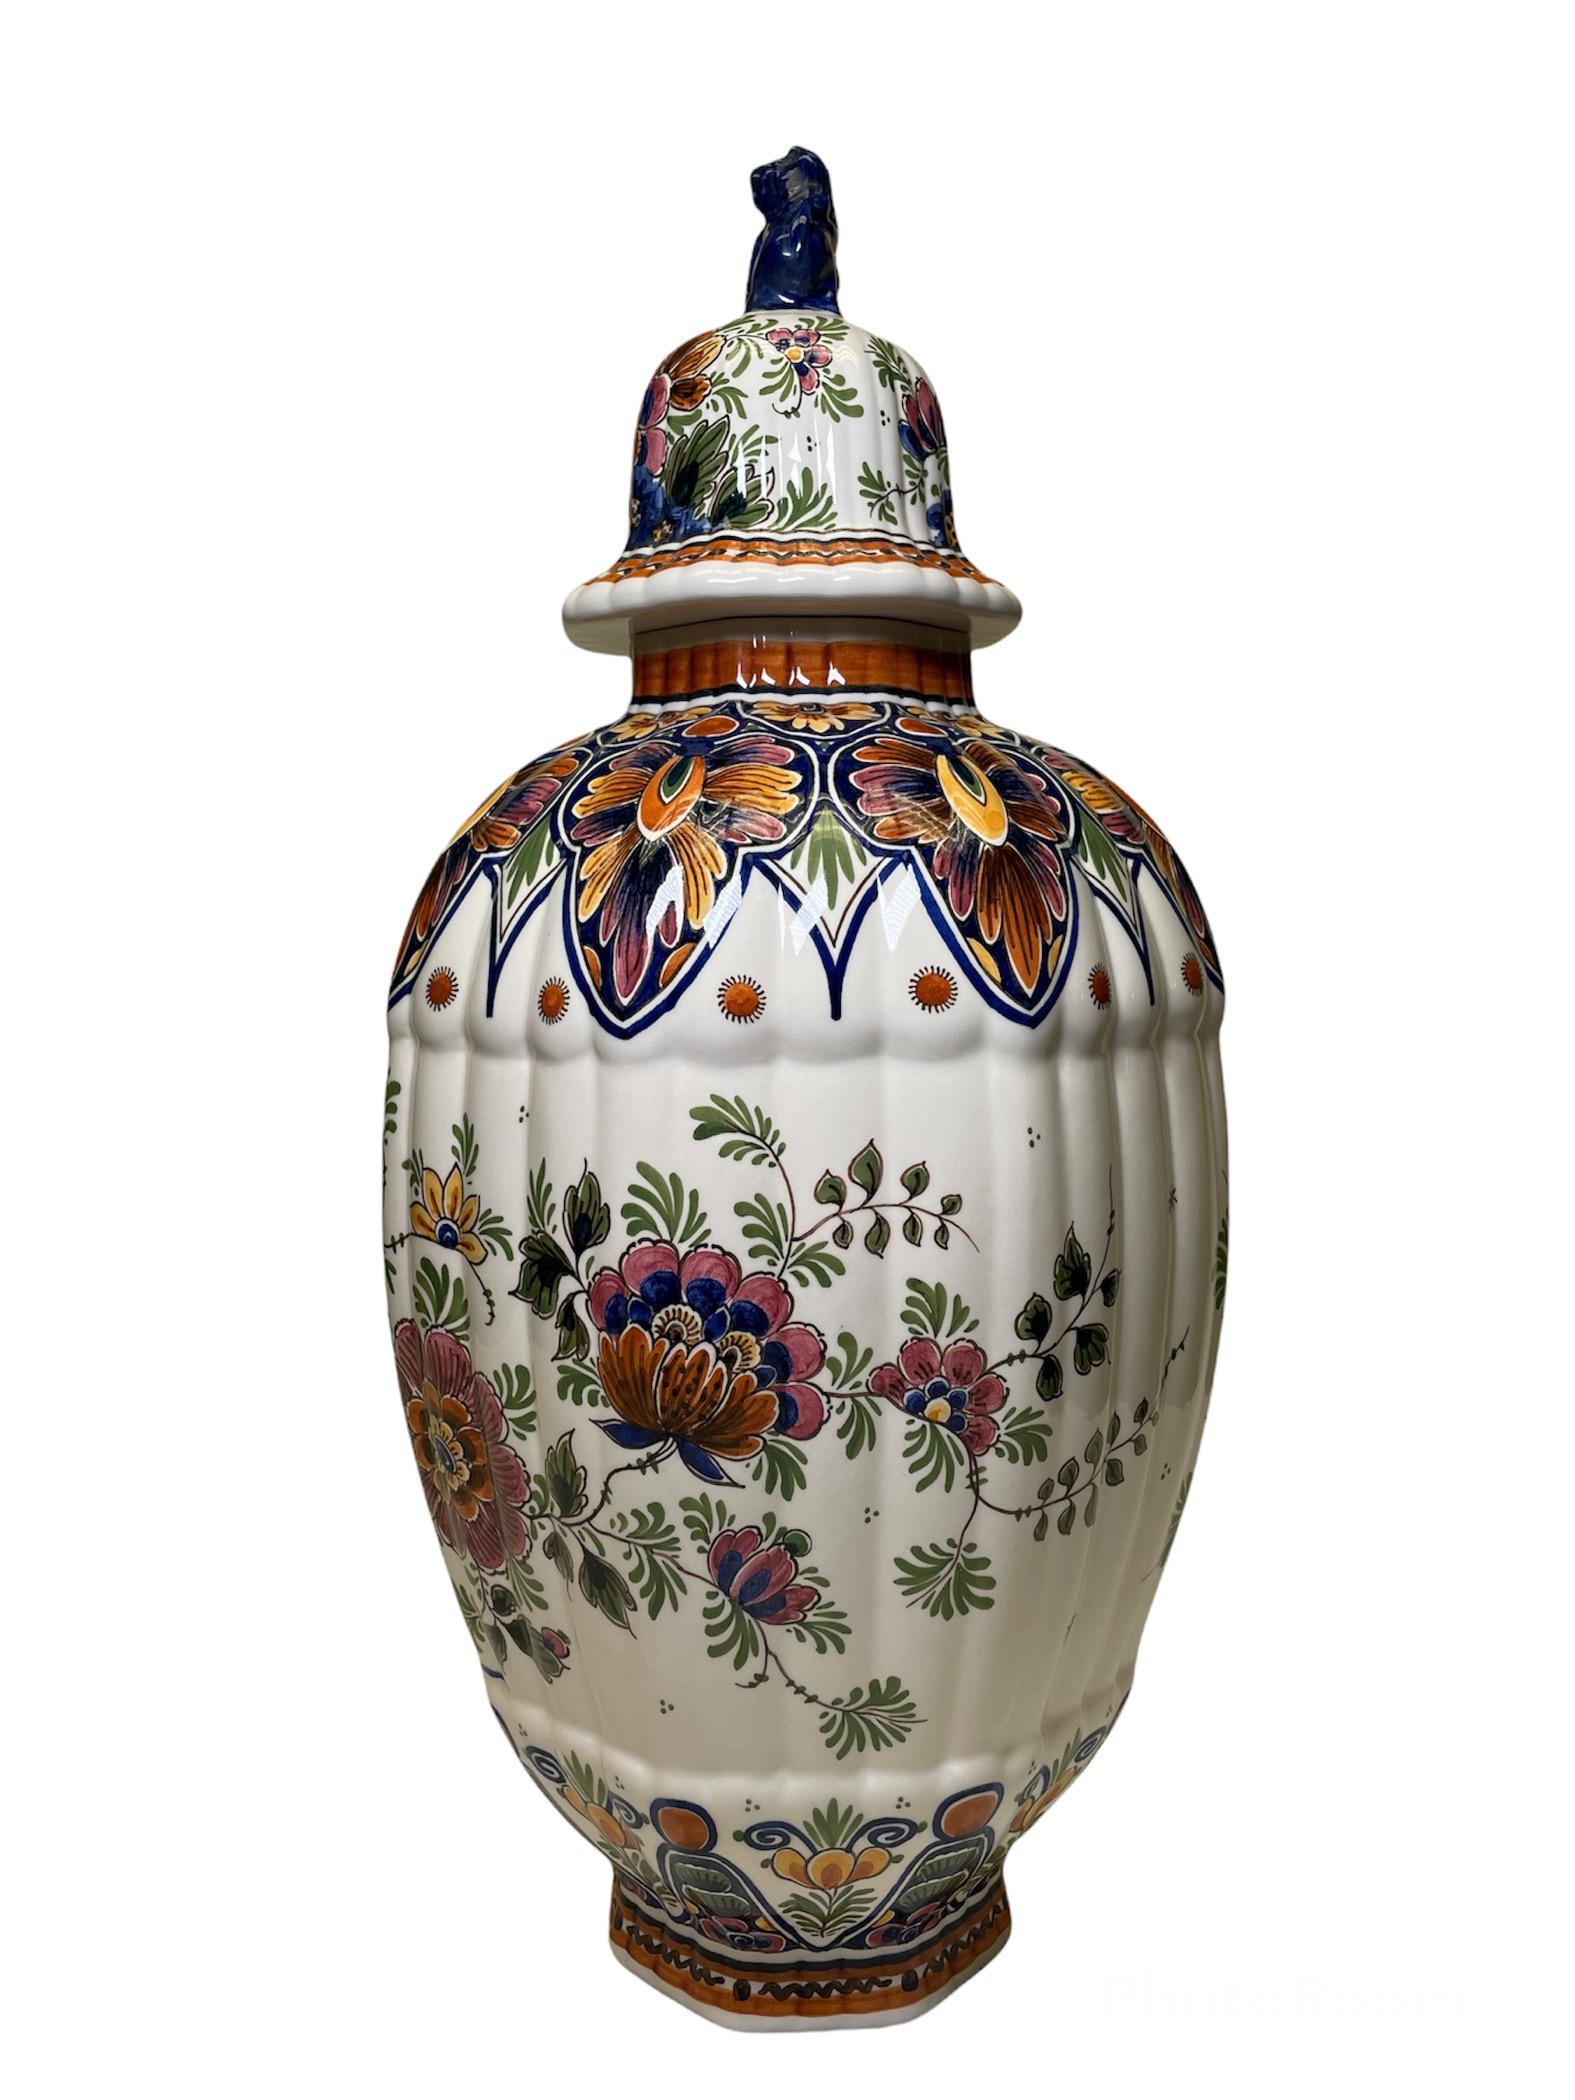 This is a Delft hand painted colorful porcelain lidded ovoid shaped urn vase. It is also reeded with a scalloped border at the upper and bottom area. The vase is adorned with a peacock over a branch of flowers followed by different large and small